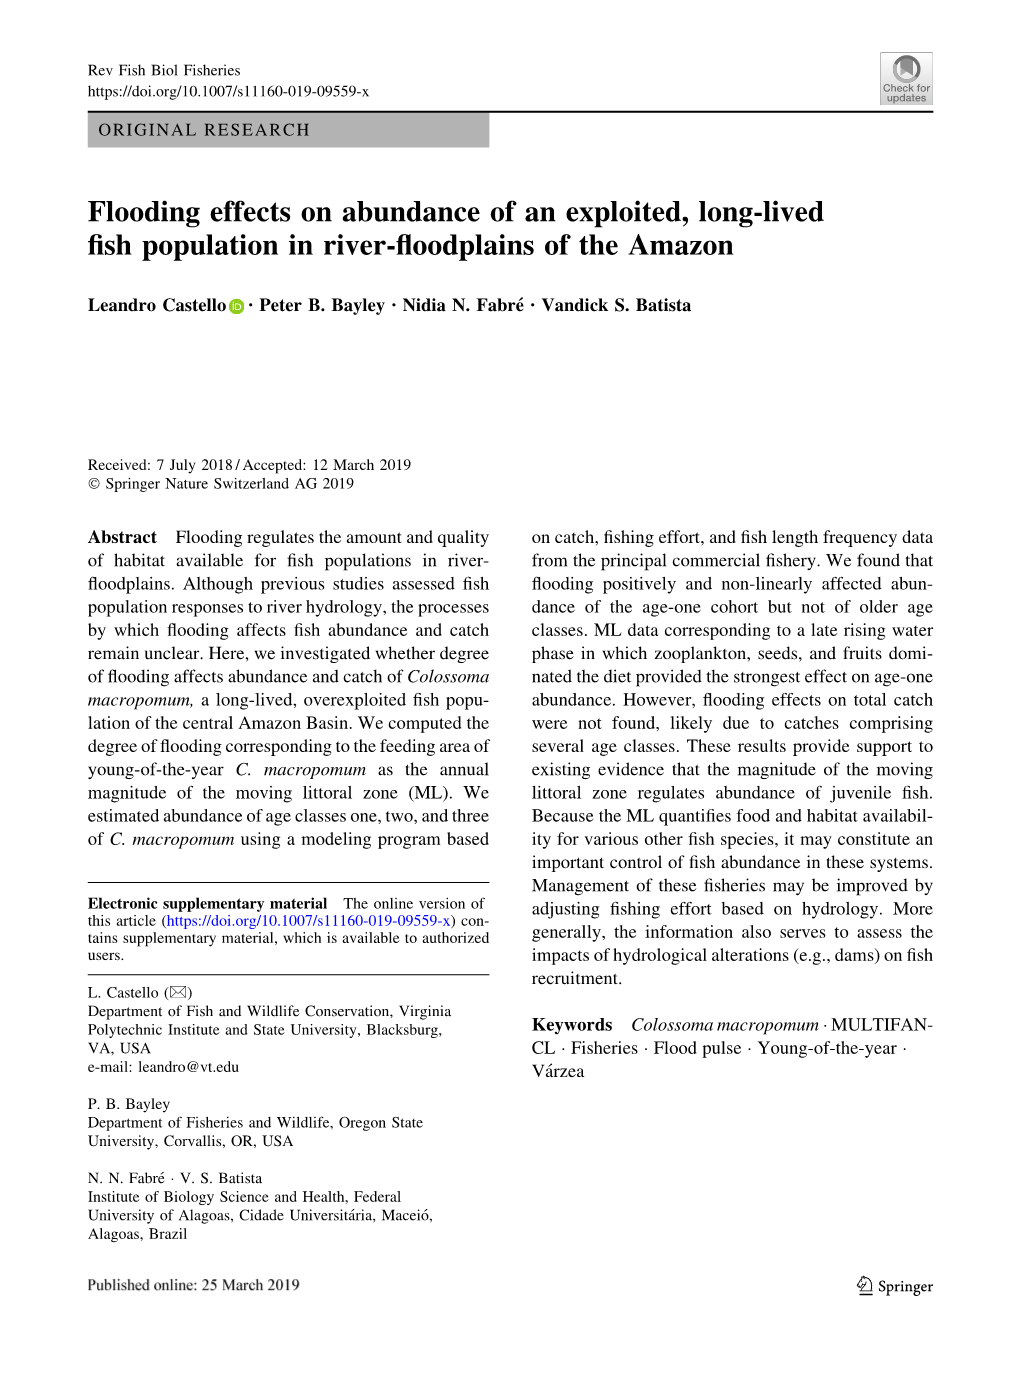 Flooding Effects on Abundance of an Exploited, Long-Lived Fish Population